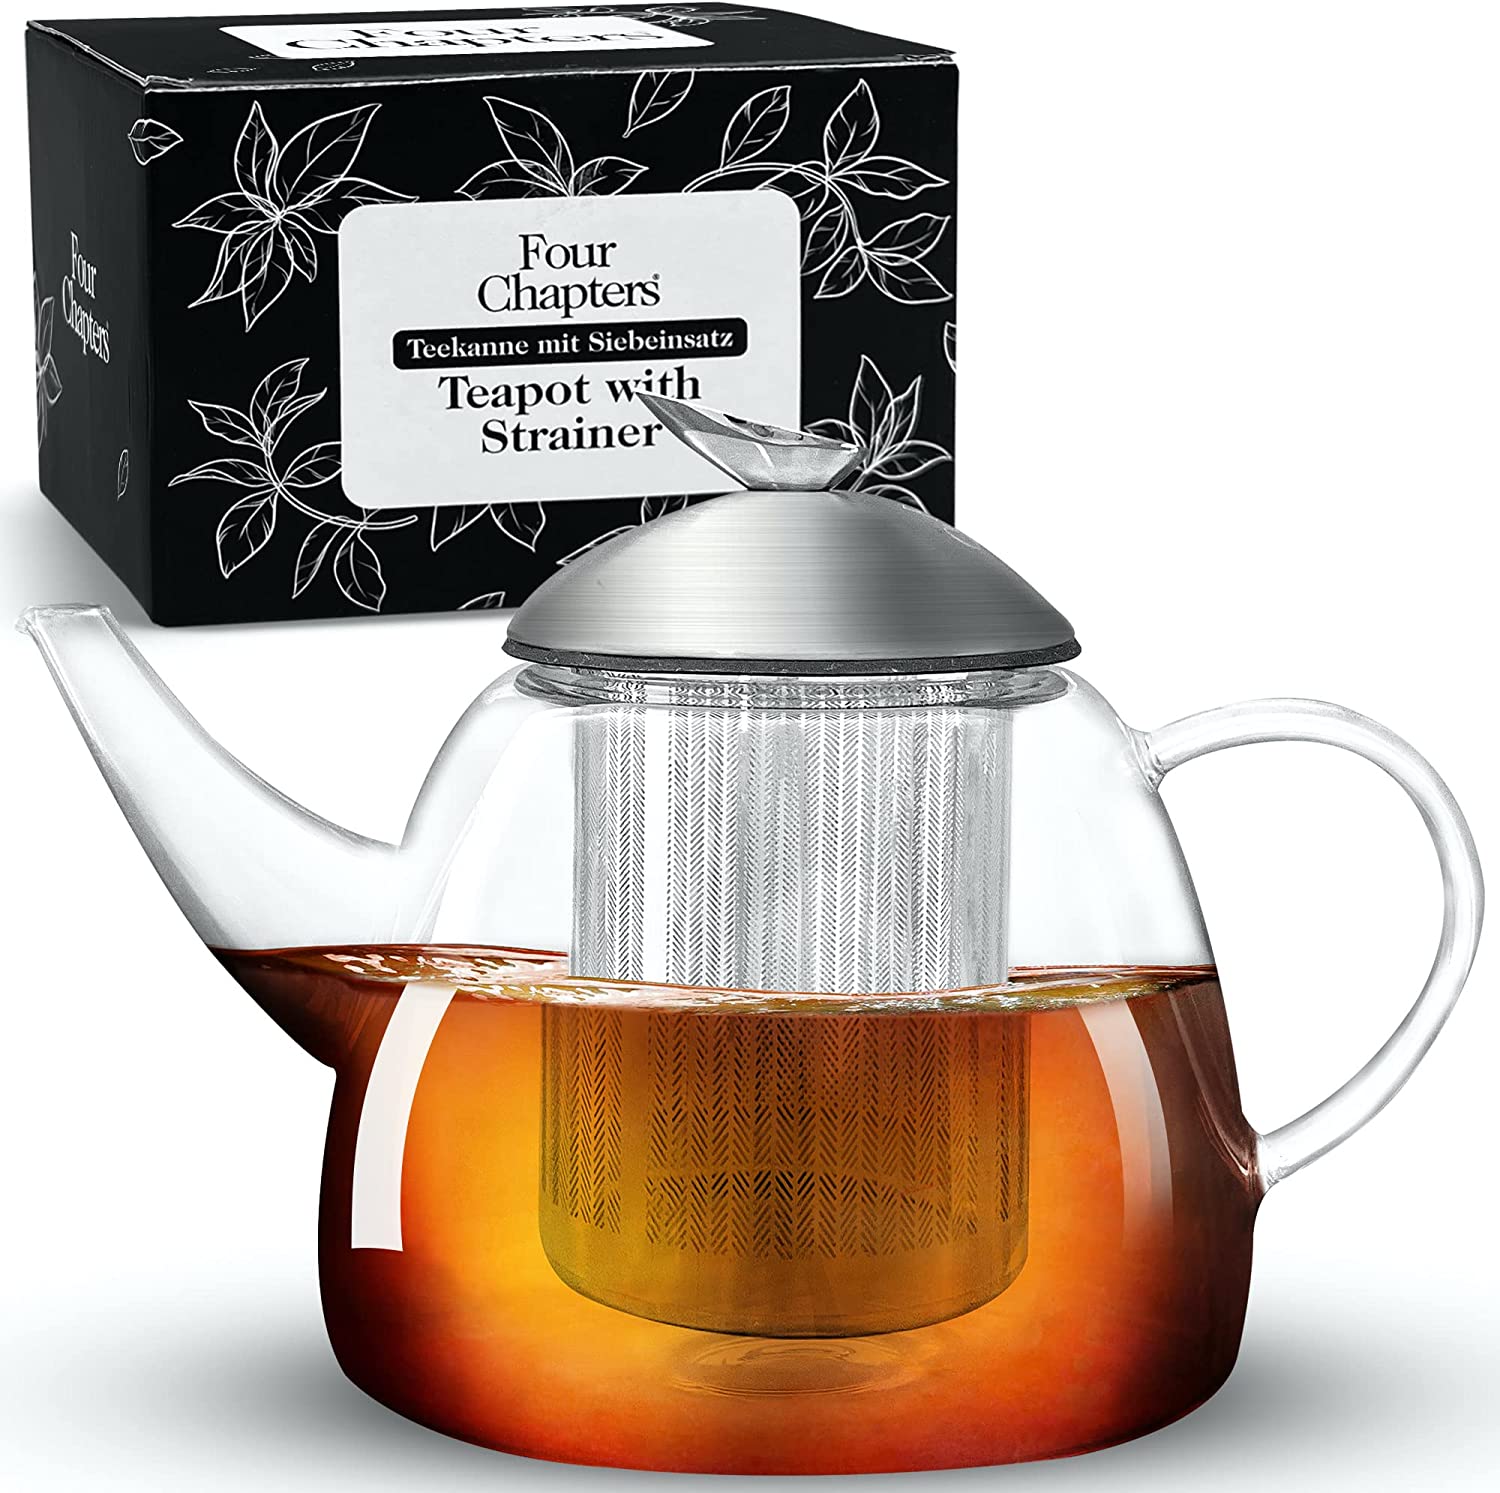 Four Chapters® Premium Teapot with Strainer Insert (1.3 L) - Glass Teapot & Removable Stainless Steel Strainer Insert - 100% Drip-Free - Tea Maker Set with Tea Strainer for Loose Tea - Teapot Glass Thermal